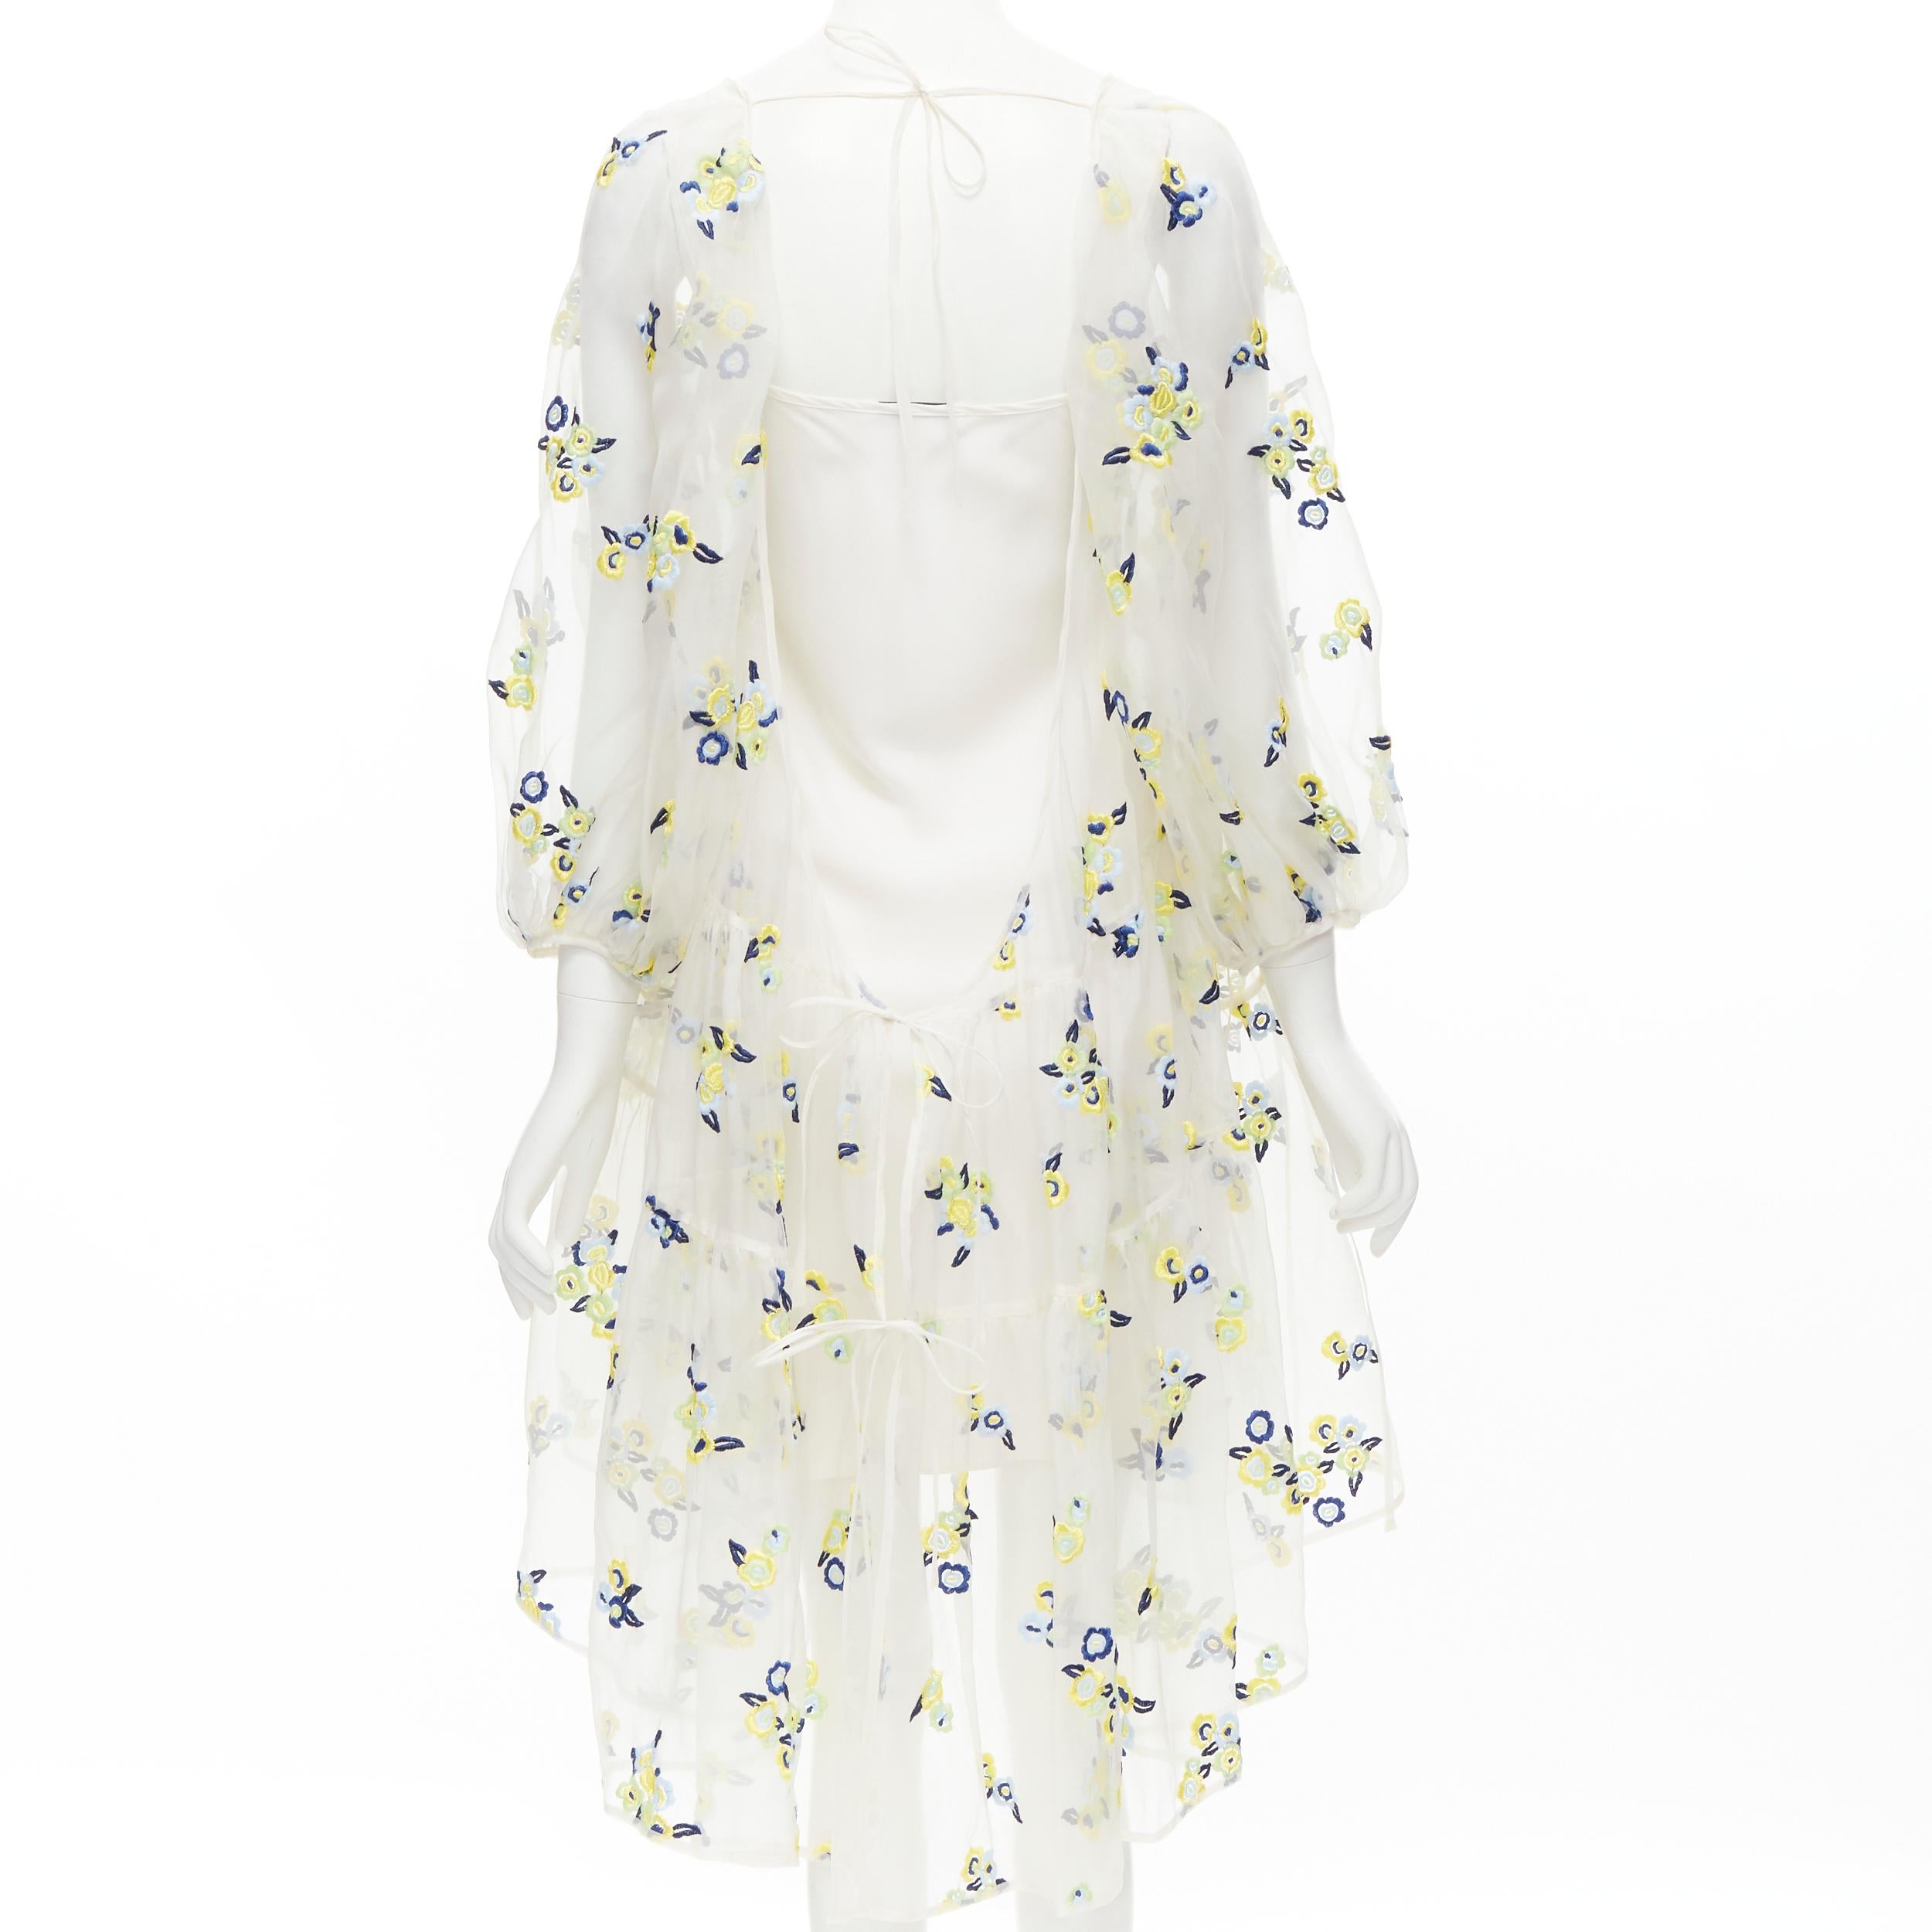 Beige CECILIE BAHNSEN Runway white blue yellow floral embroidery sheer puff dress XS